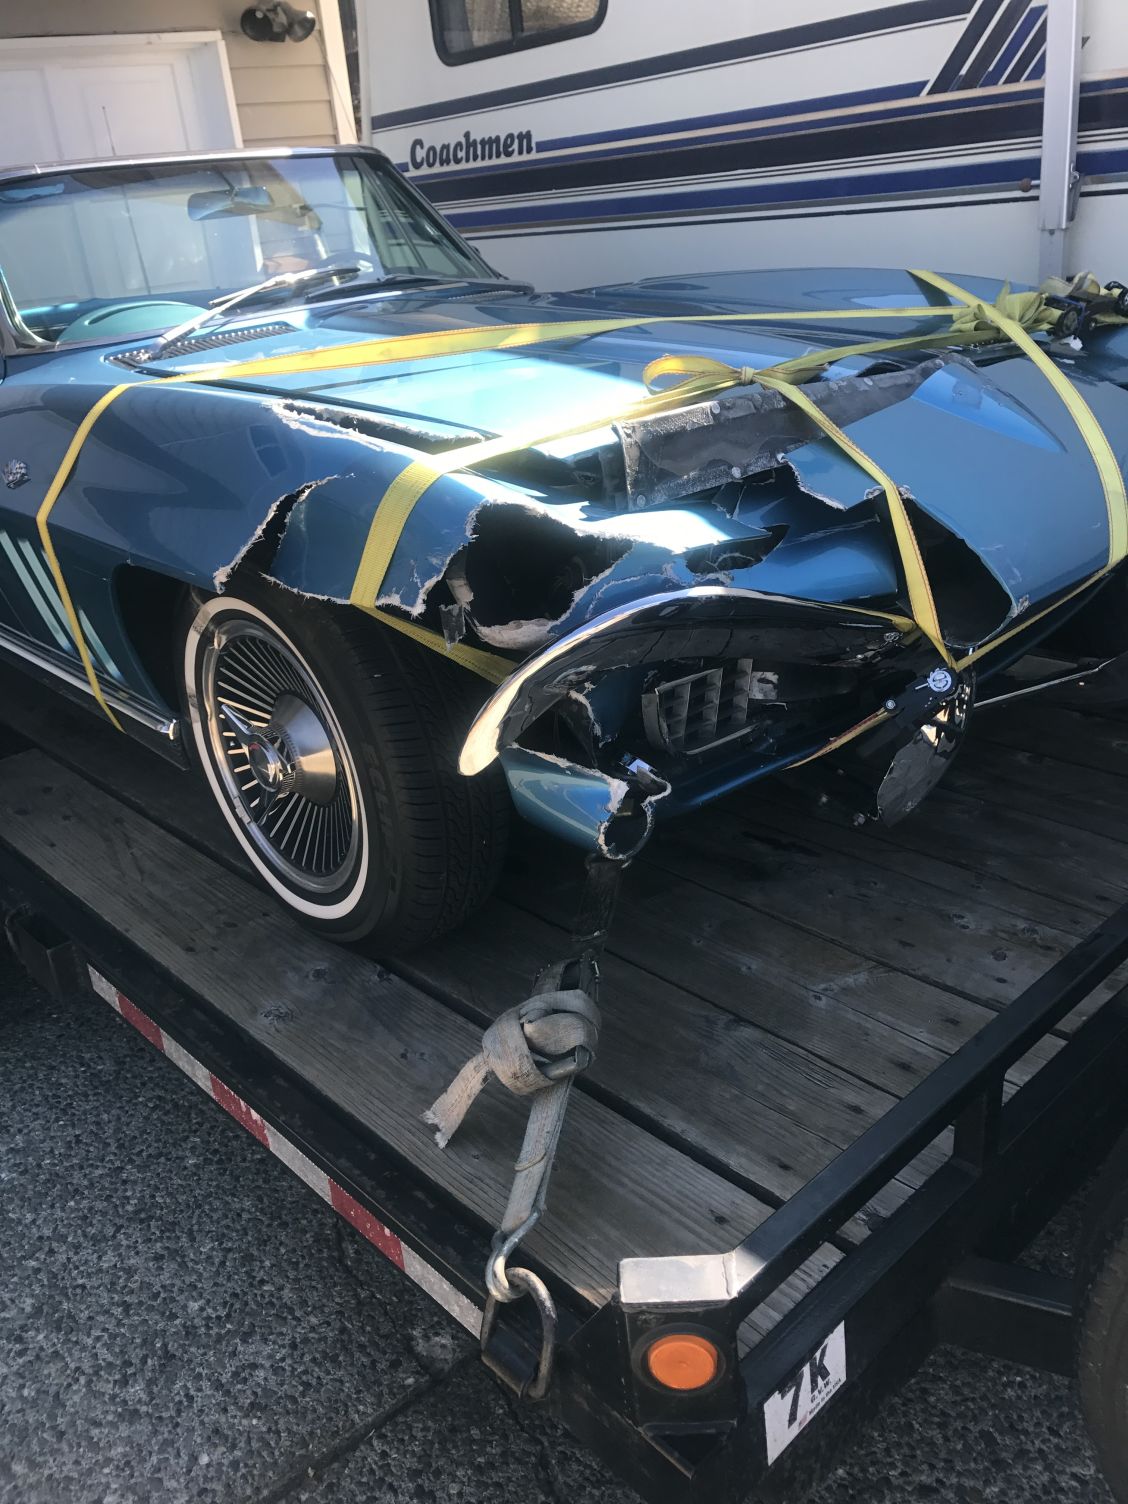 What if Your Friend Wrecked Your Corvette?